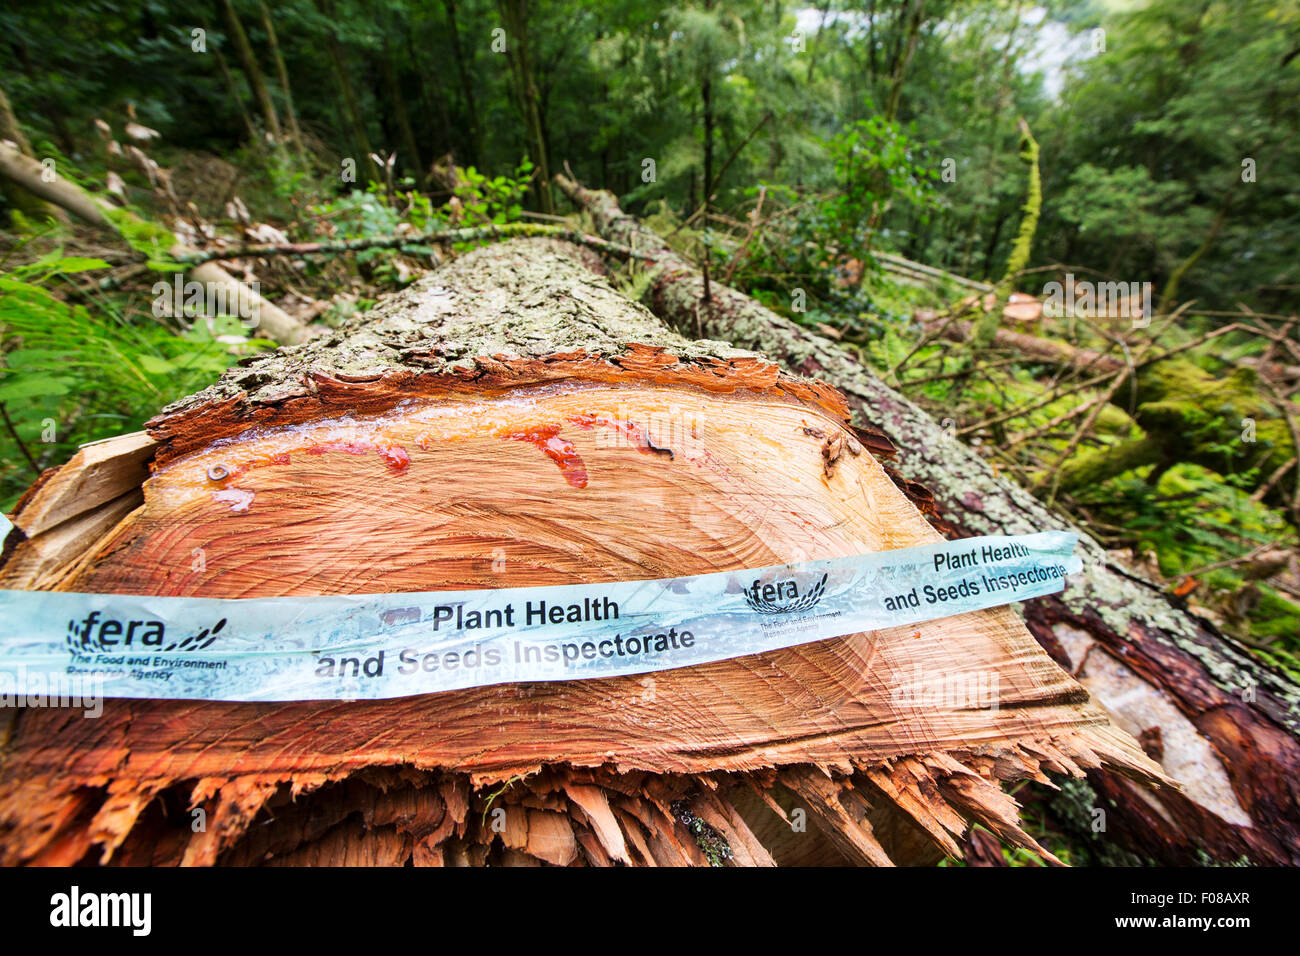 A woodland in Grasmere in the Lake District, UK, with Larch Trees infected by Phytophera Ramorum, a disease that infects Oaks and Larch Trees (Larix decidua). The Larch trees have been felled to try and contain the spread of the disease. Stock Photo